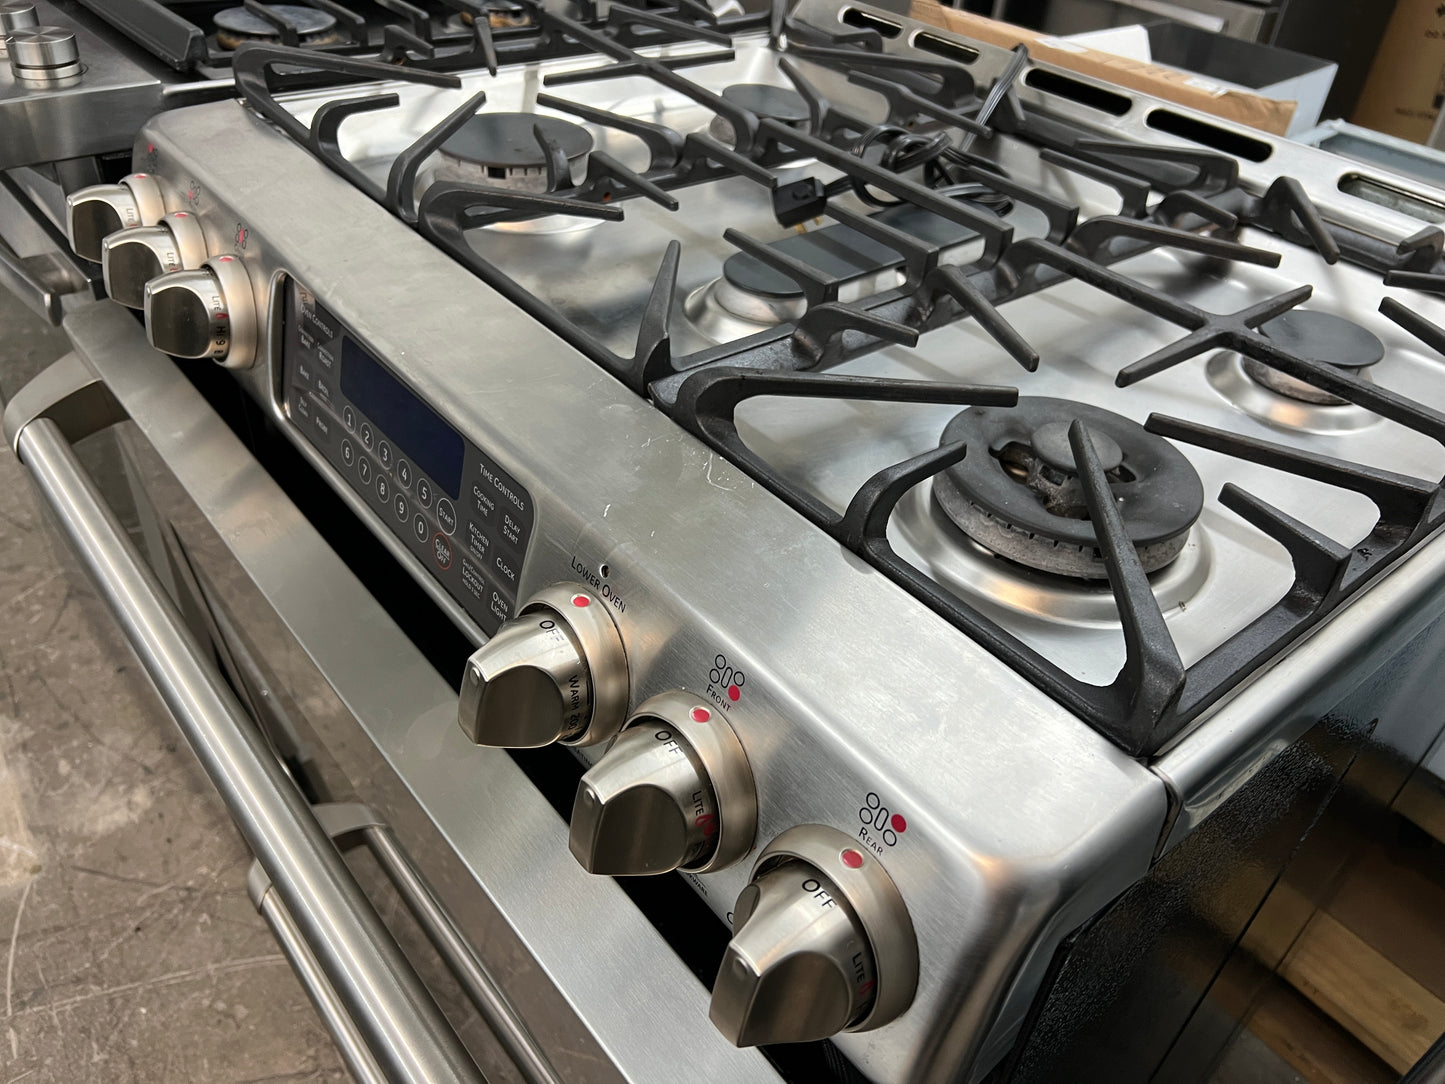 GE Cafe Series  CGS985SETSS 30 Inch Slide-In Gas Range,  Tri-Ring Burner, Gas Convection, Temperature Probe, Baking Drawer, Griddle, Self-Clean, 5.4 cu. ft. Oven, 5 Sealed Burners, GE Fits! Guarantee, Star-K,ADA Compliance, 369279